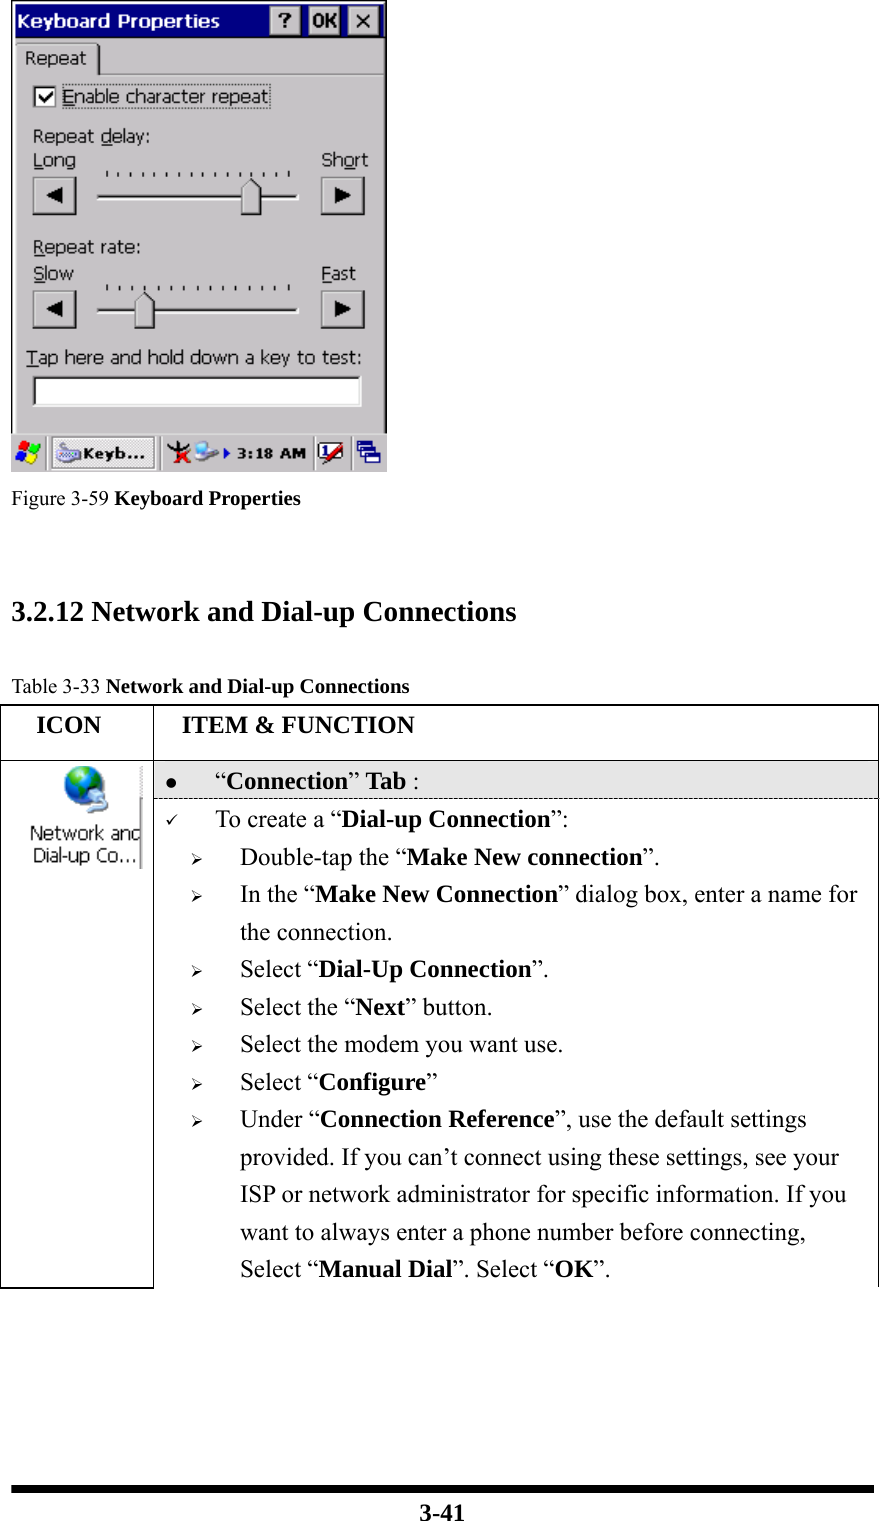  3-41  Figure 3-59 Keyboard Properties   3.2.12 Network and Dial-up Connections  Table 3-33 Network and Dial-up Connections   ICON   ITEM &amp; FUNCTION z “Connection” Tab :    9 To create a “Dial-up Connection”: ¾ Double-tap the “Make New connection”. ¾ In the “Make New Connection” dialog box, enter a name for the connection. ¾ Select “Dial-Up Connection”. ¾ Select the “Next” button. ¾ Select the modem you want use. ¾ Select “Configure” ¾ Under “Connection Reference”, use the default settings provided. If you can’t connect using these settings, see your ISP or network administrator for specific information. If you want to always enter a phone number before connecting, Select “Manual Dial”. Select “OK”. 